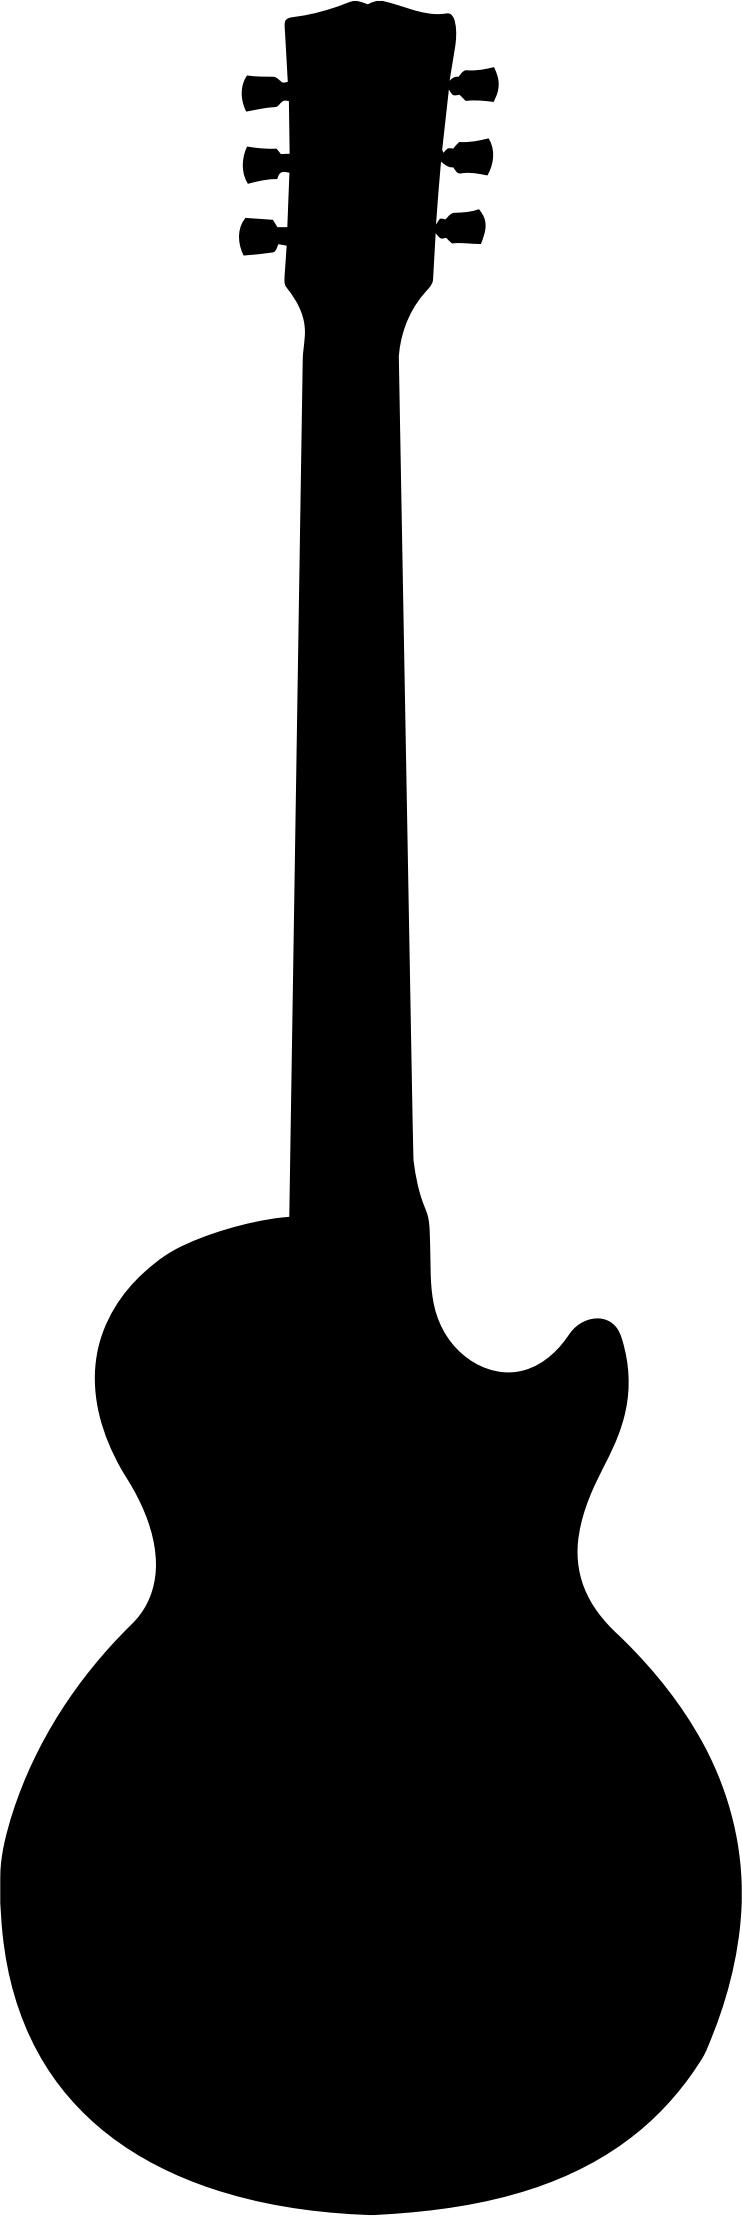 Guitar silhouette png